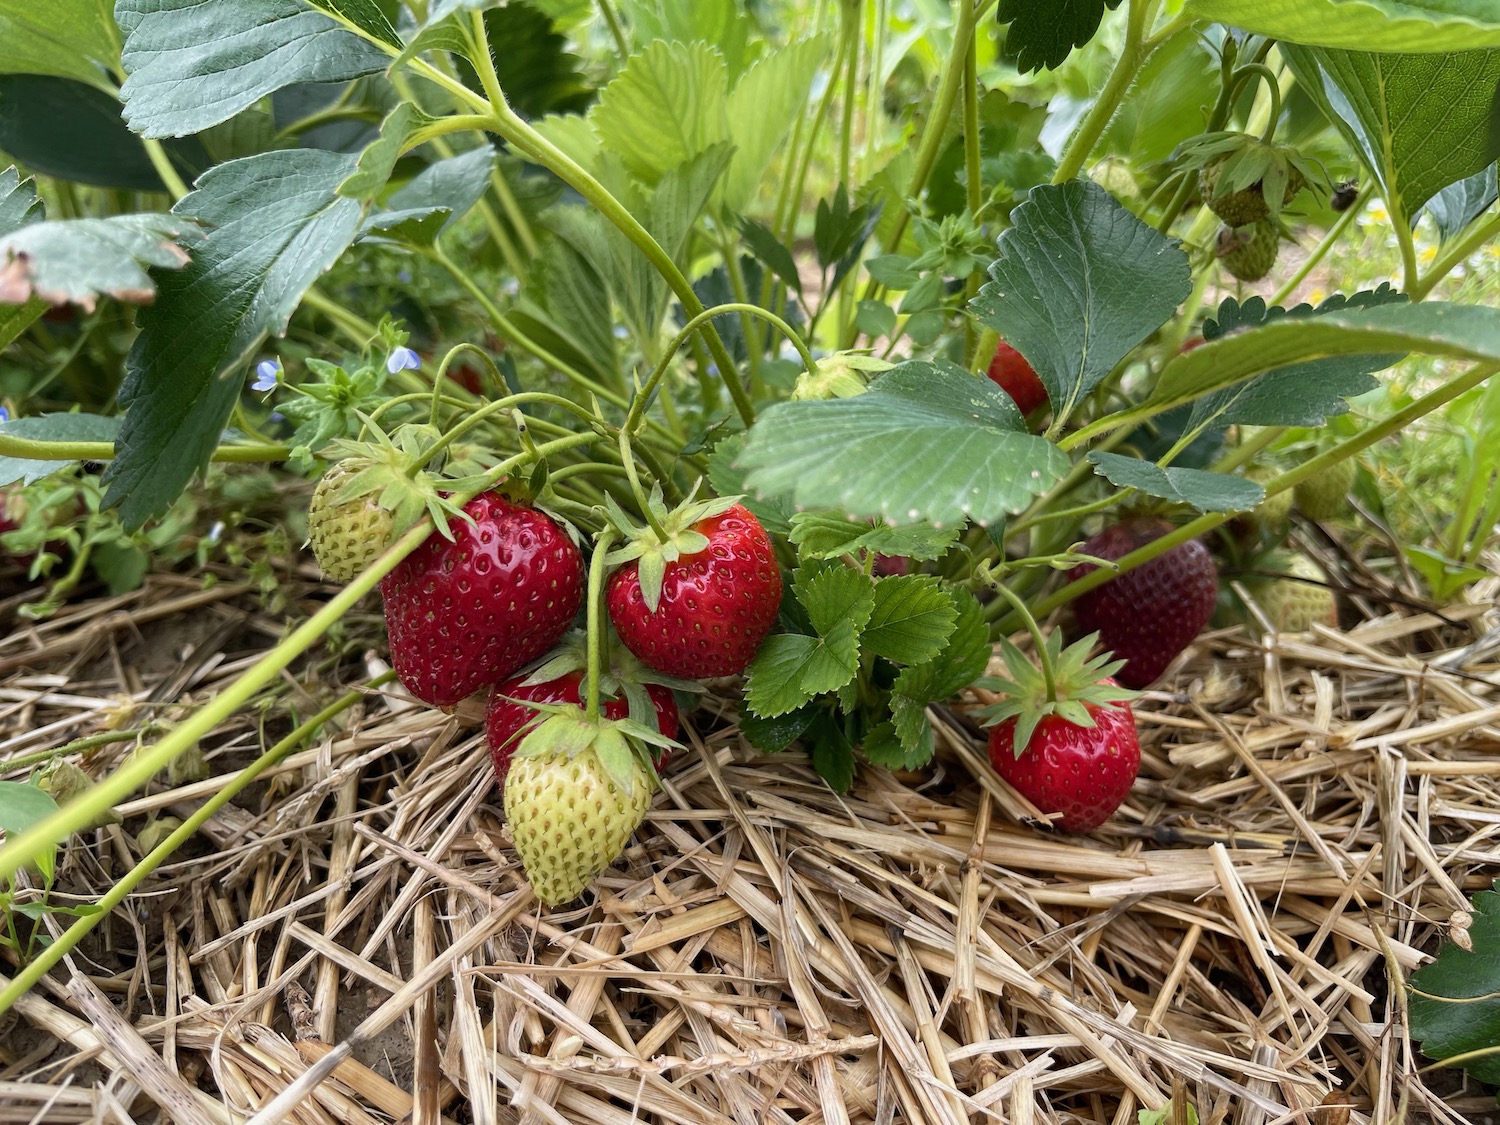 strawberries growing on a plant